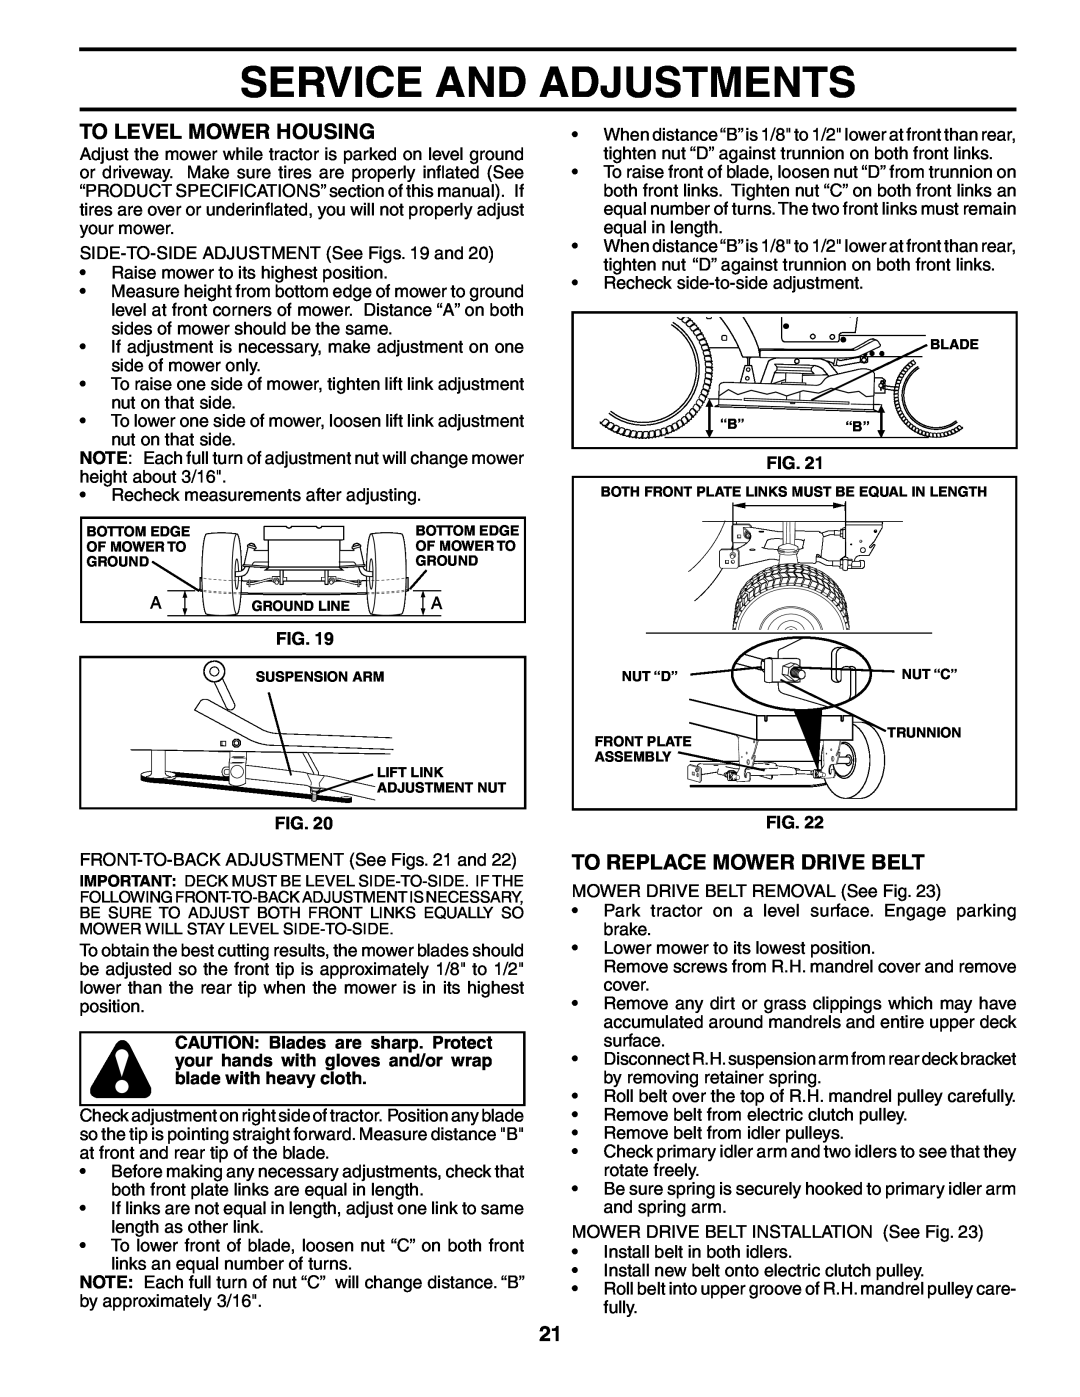 Poulan 184425, 954569455 manual To Level Mower Housing, To Replace Mower Drive Belt, Service And Adjustments 